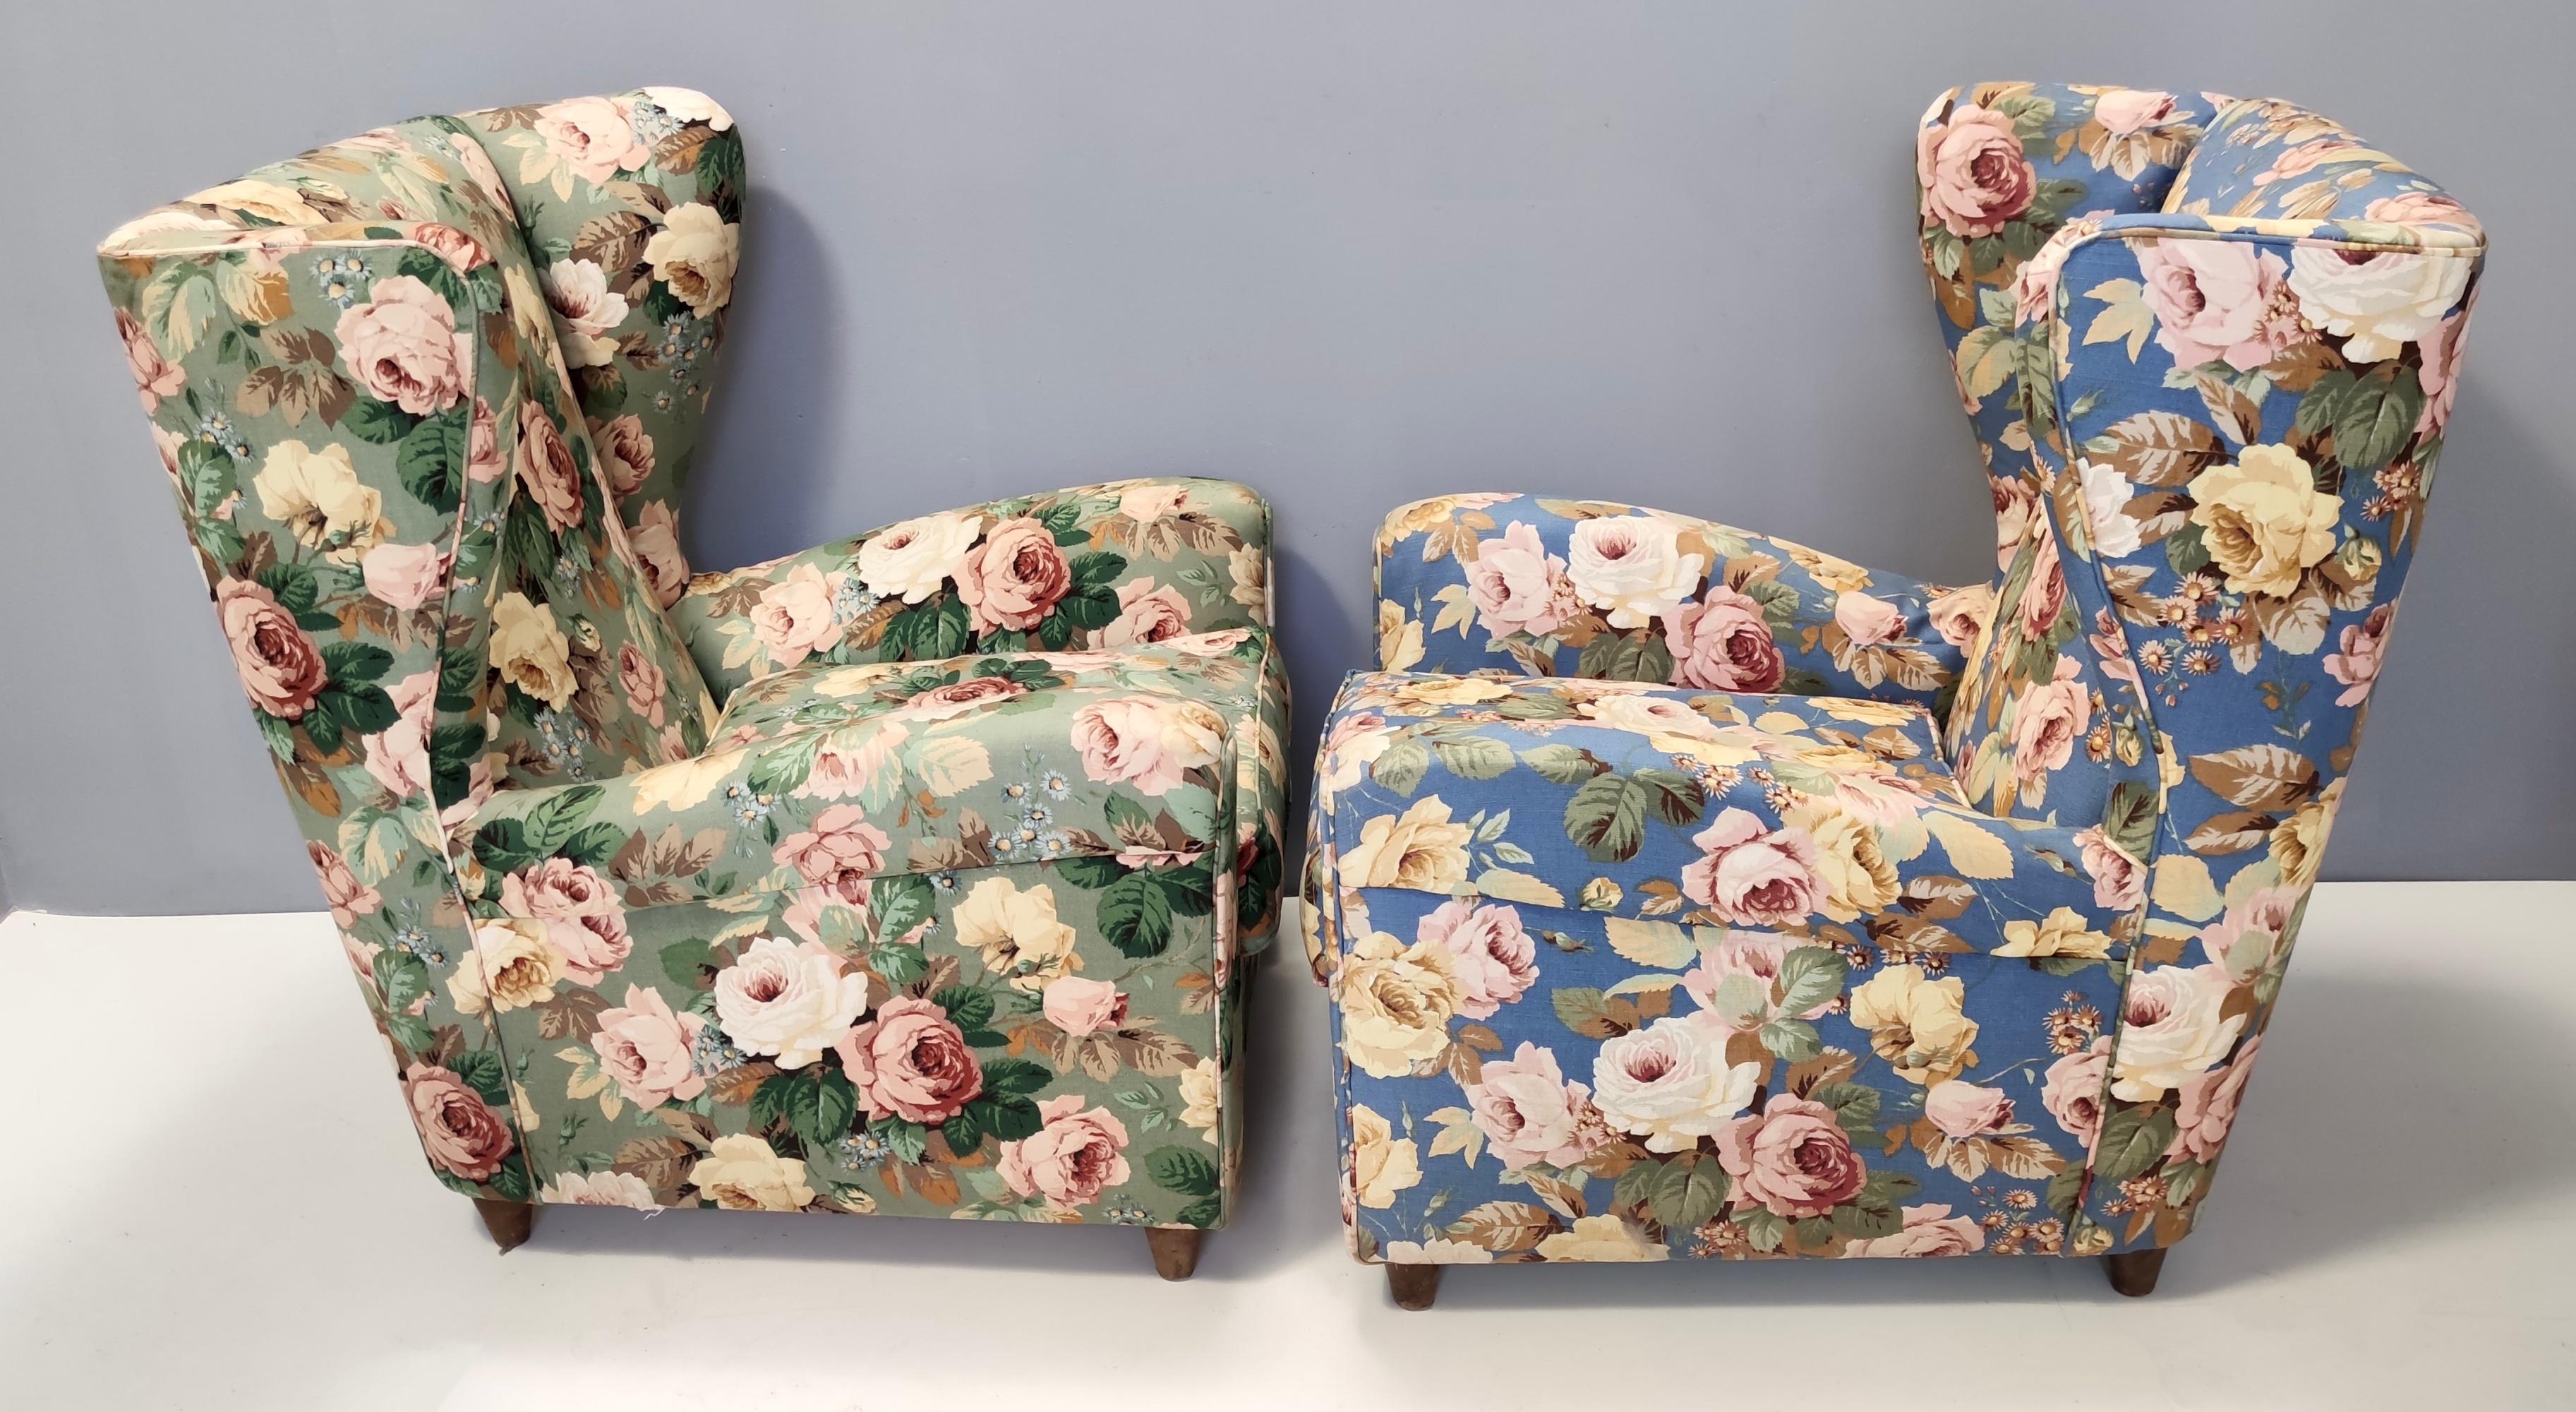 Vintage Pair of Authentic Floral Fabric Wingback Armchairs by Paolo Buffa Italy In Excellent Condition For Sale In Bresso, Lombardy